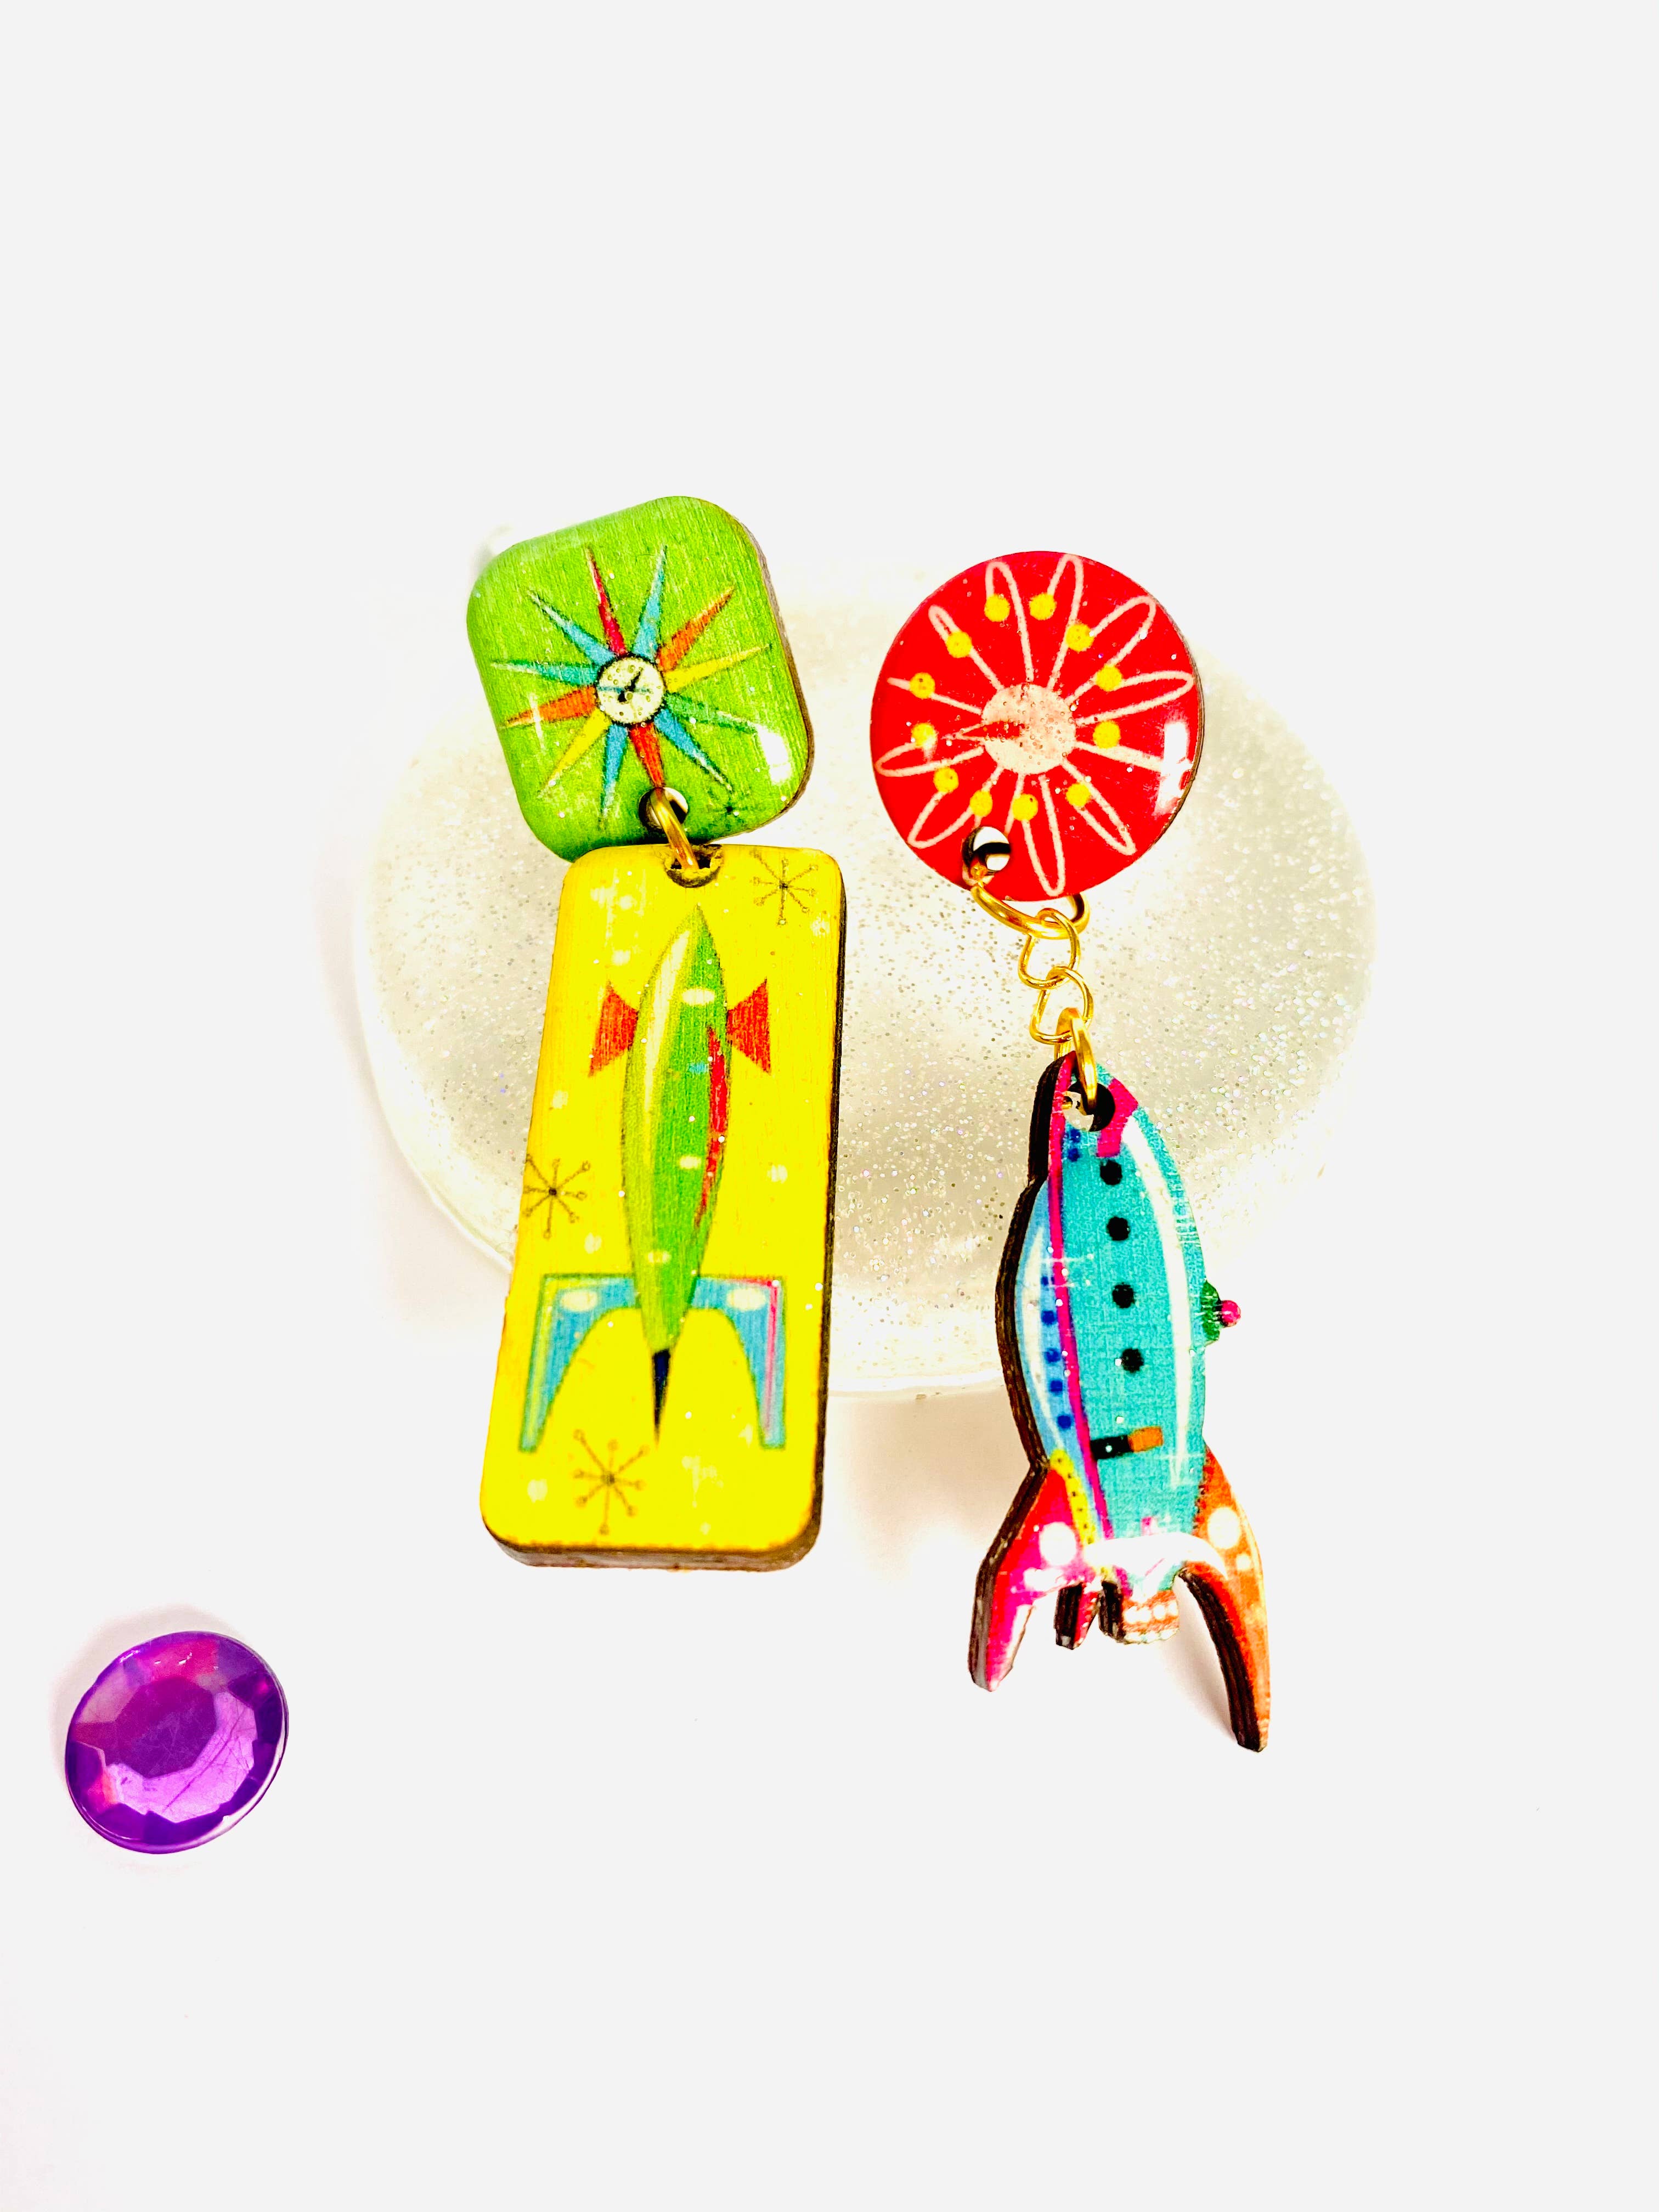 Funky mismatched rocket vintage retro statement earrings by Rosie Rose Parker